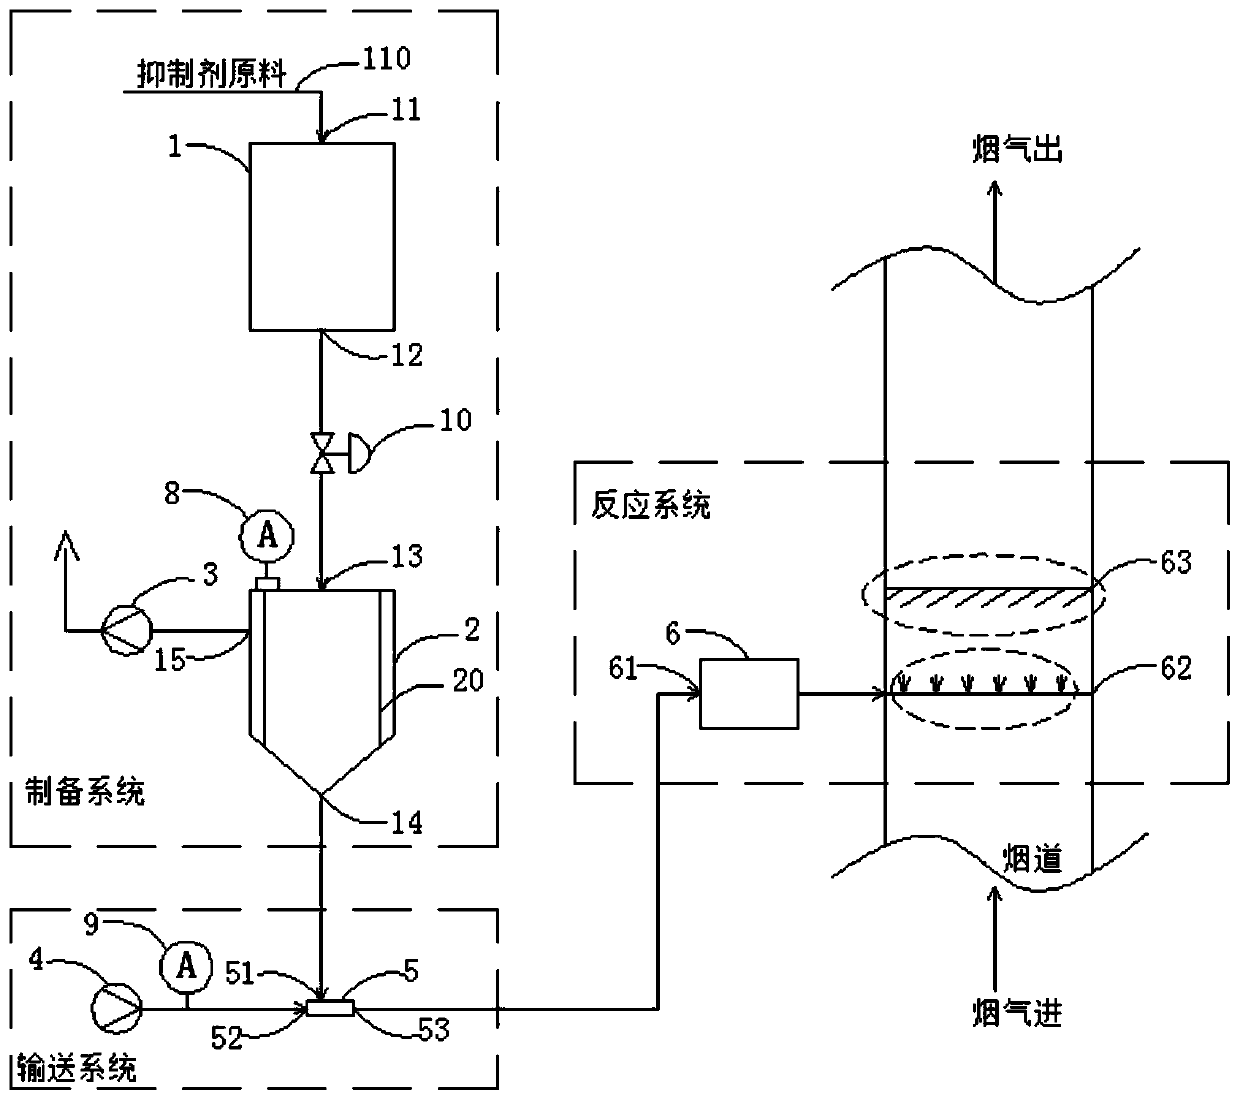 Equipment inhibiting generation of dioxin in incineration flue gas and use method of equipment